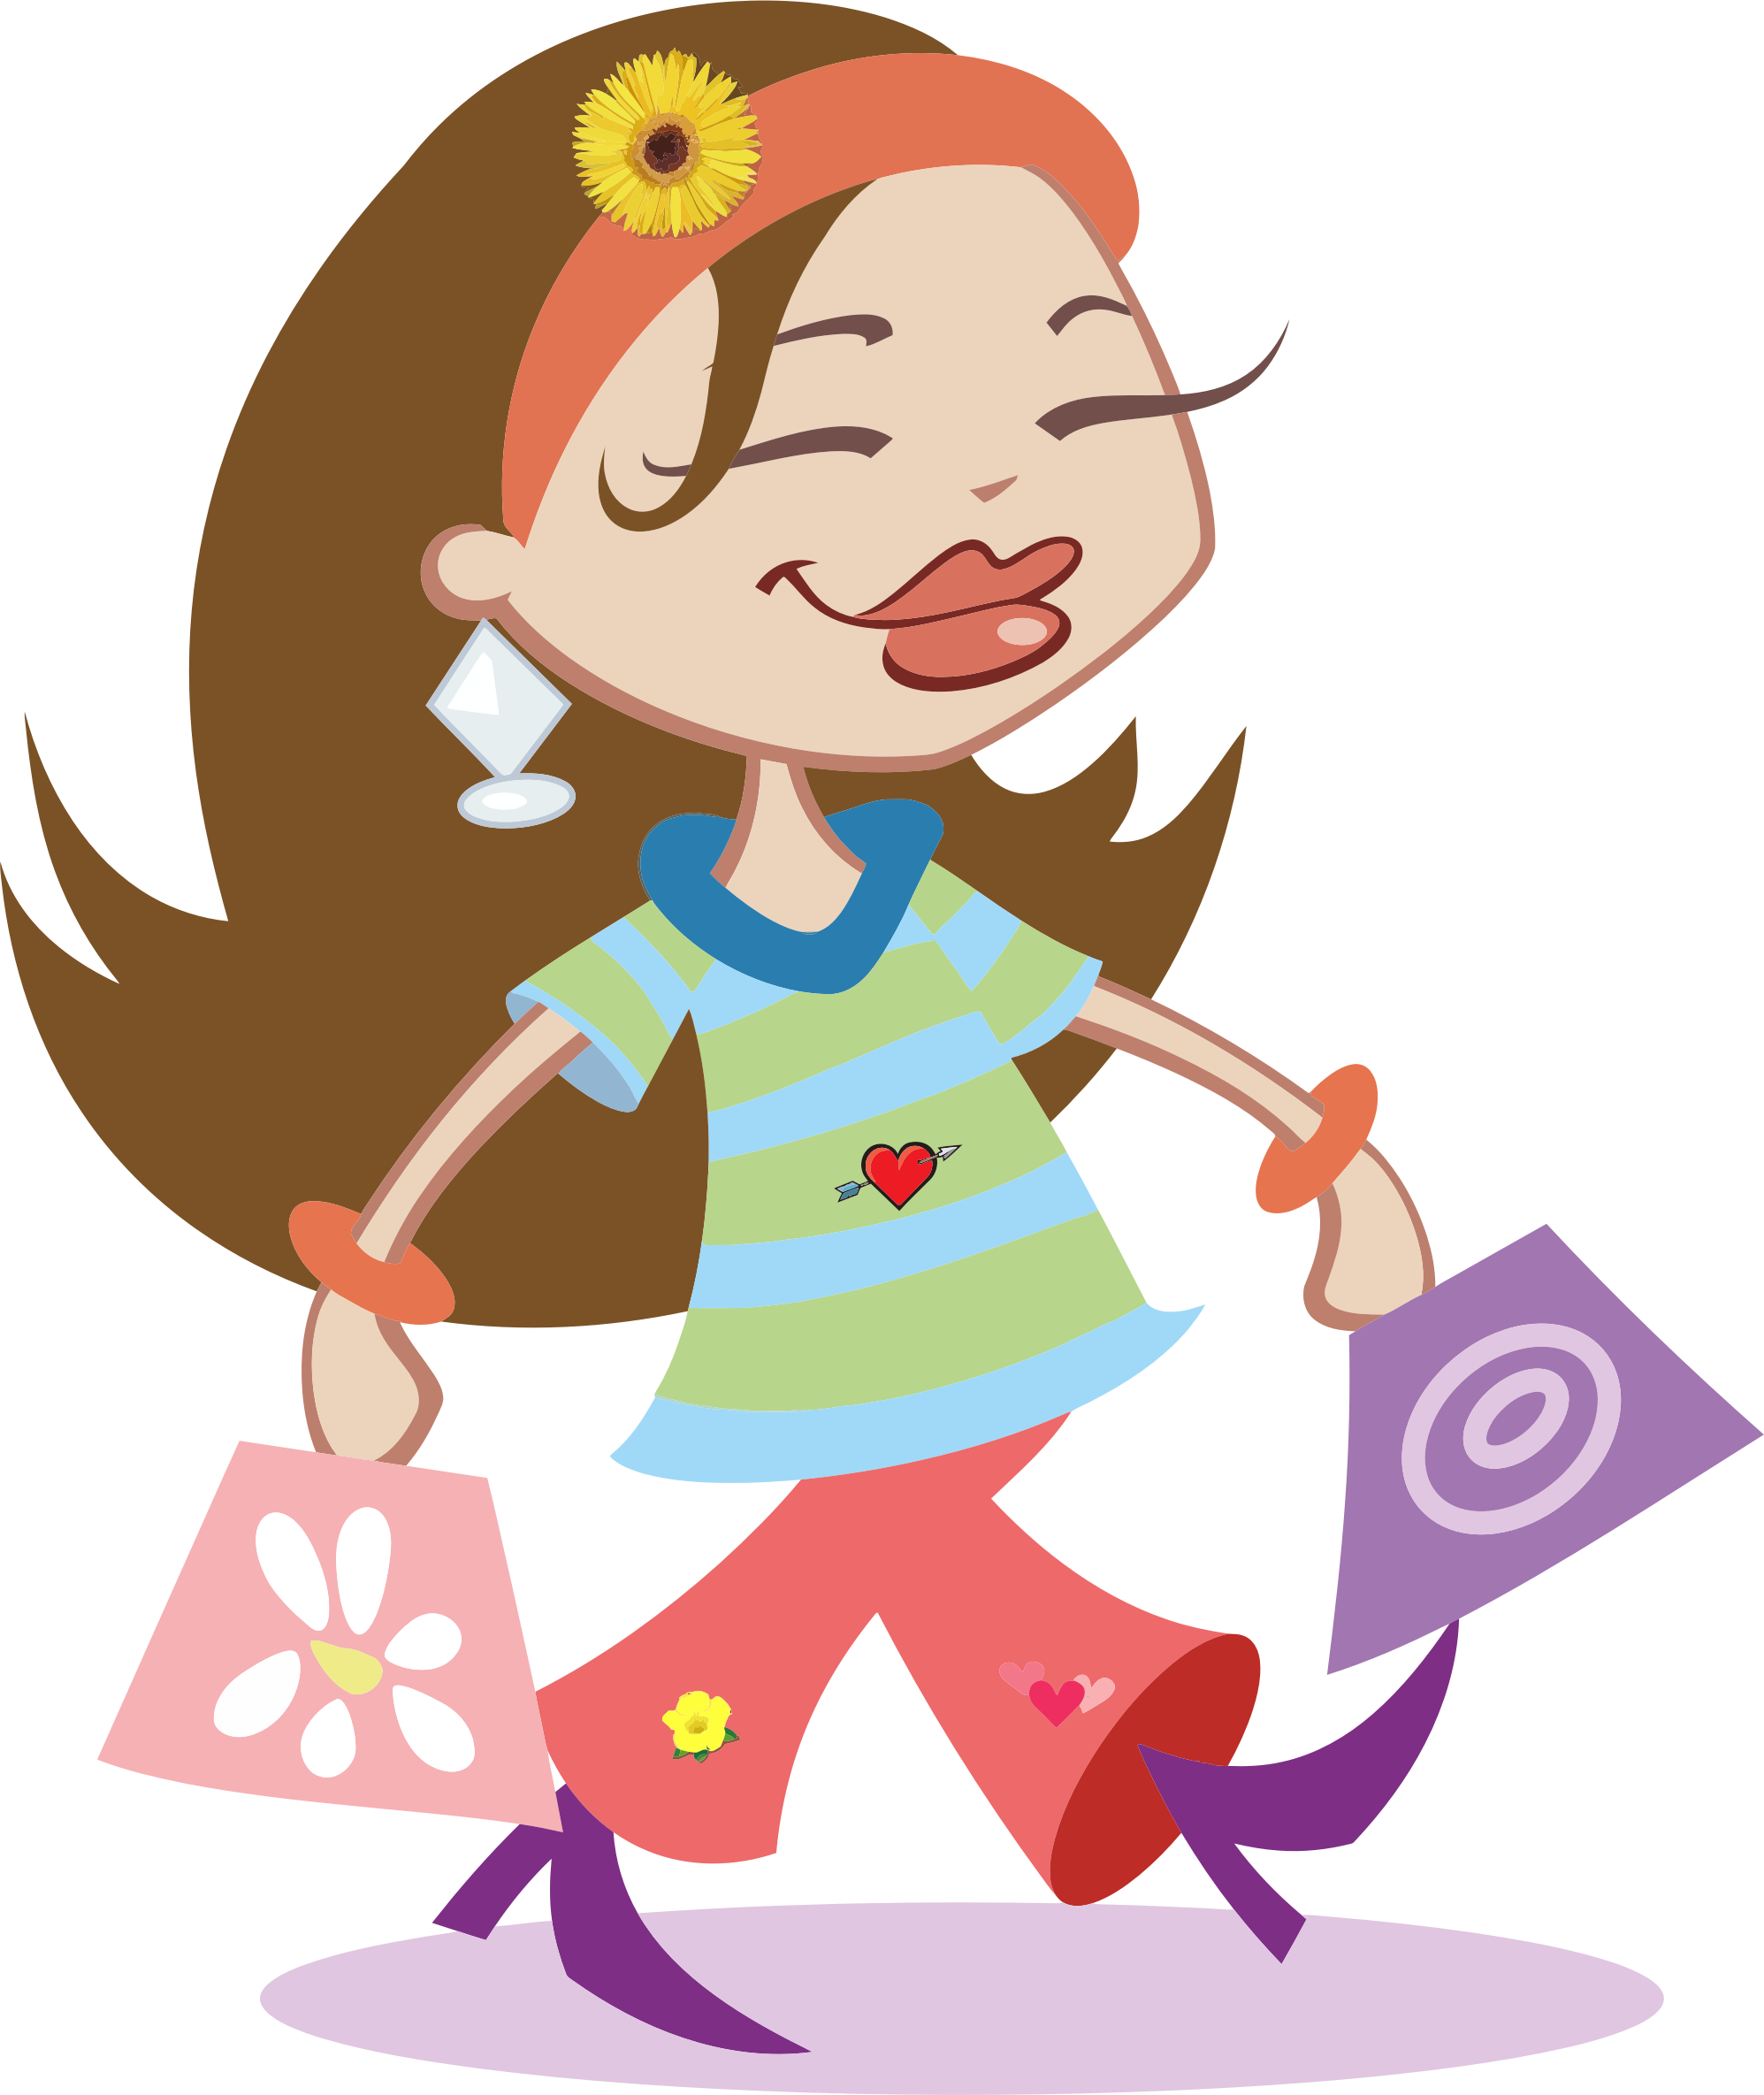 Shopping Girl Images Png - ClipArt Best